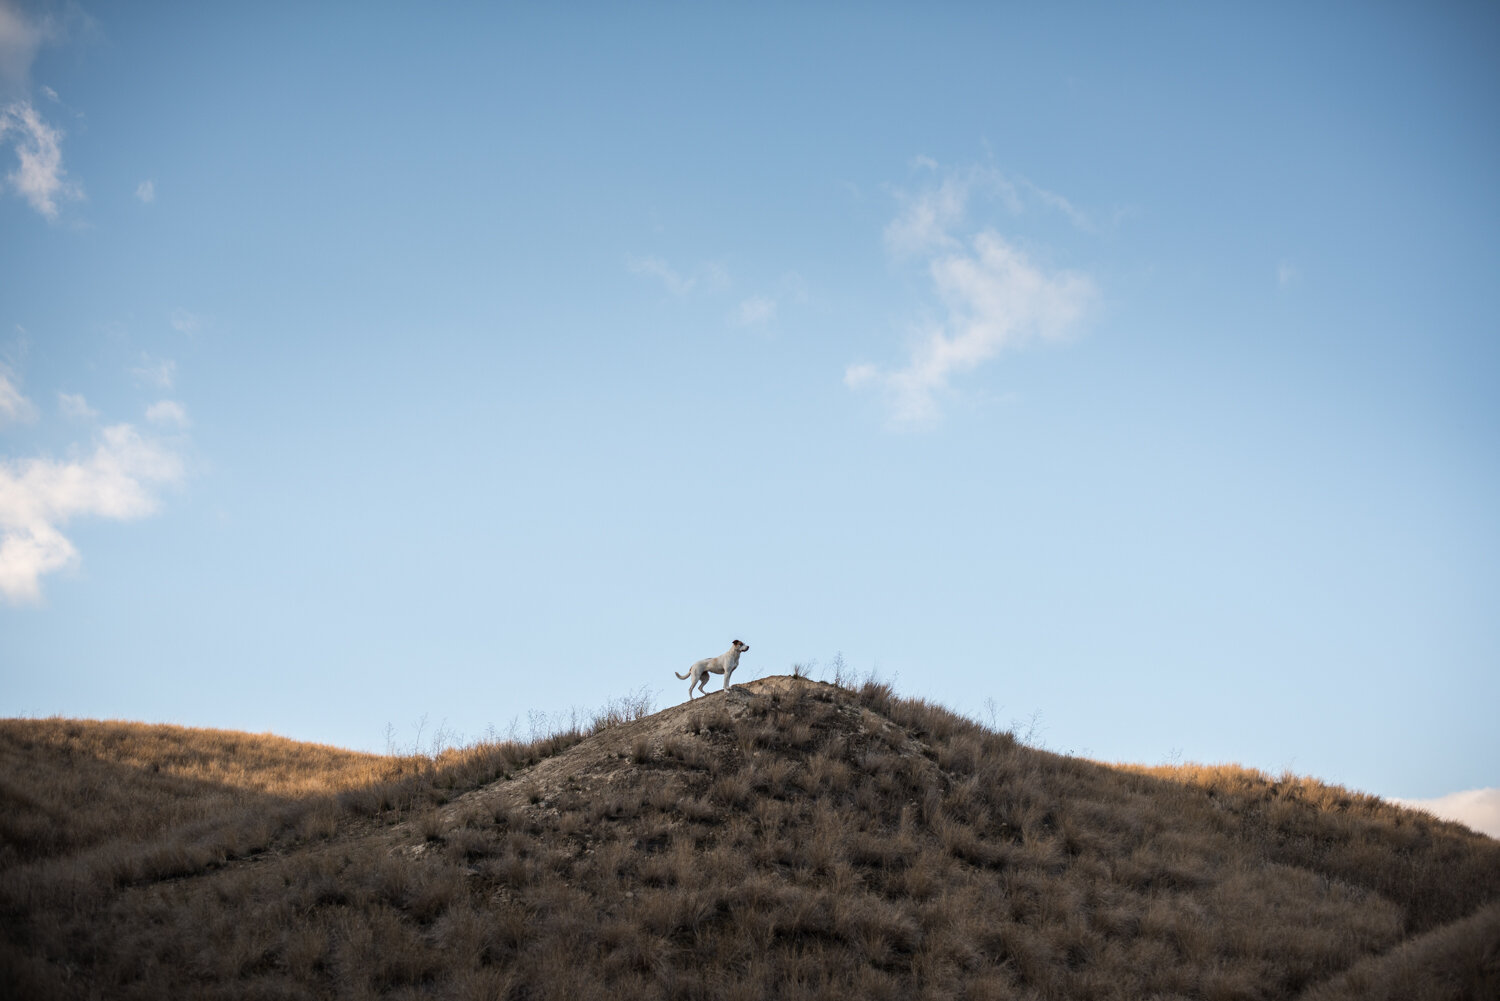  A dog goes for a walk along the ridge of one of the hills in the grasslands of Kamloops, BC during an outdoor pet portrait session. 